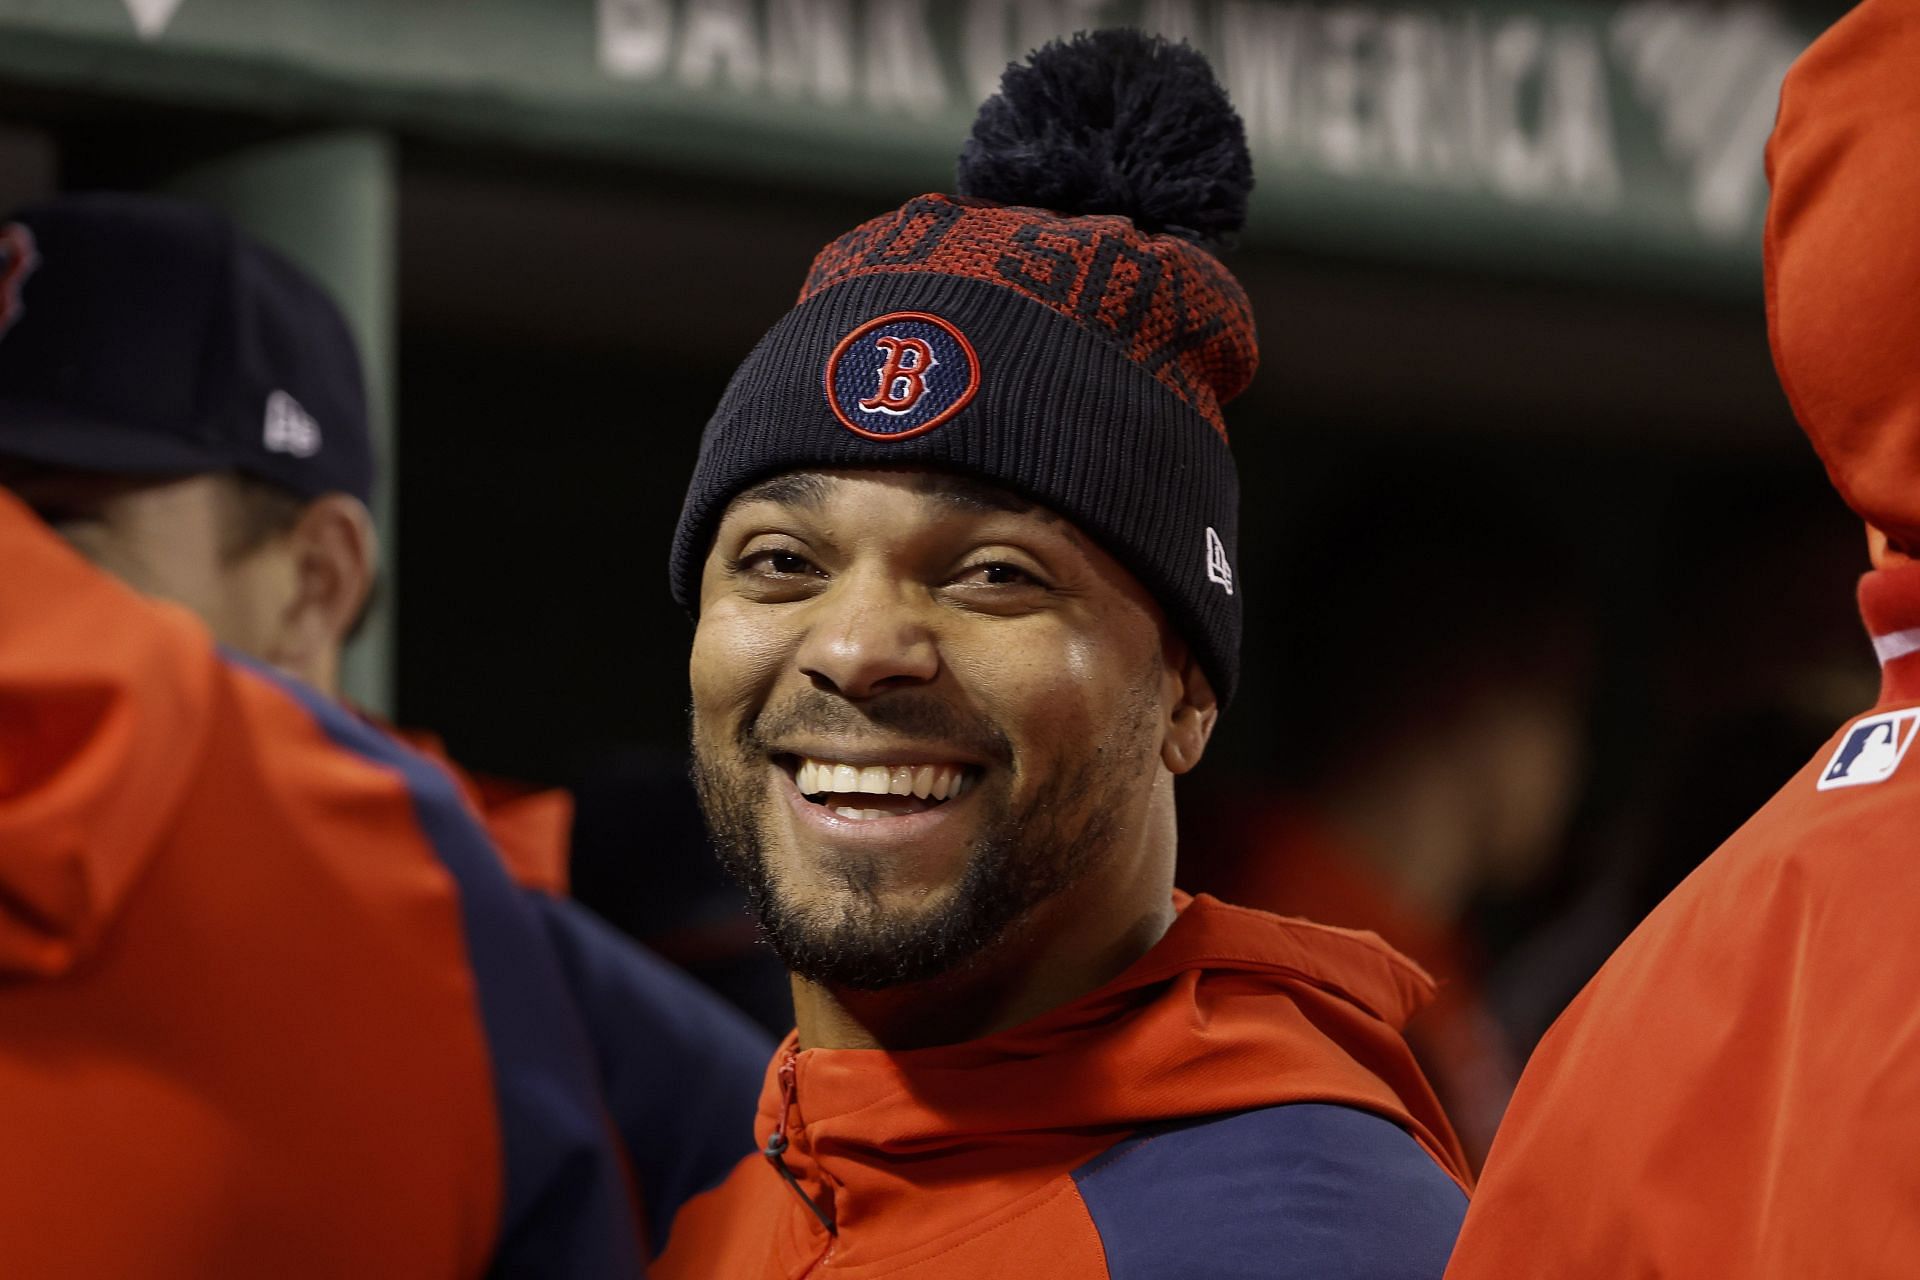 Xander Bogaerts smiles with teammates in the dugout during a game at Fenway Park.